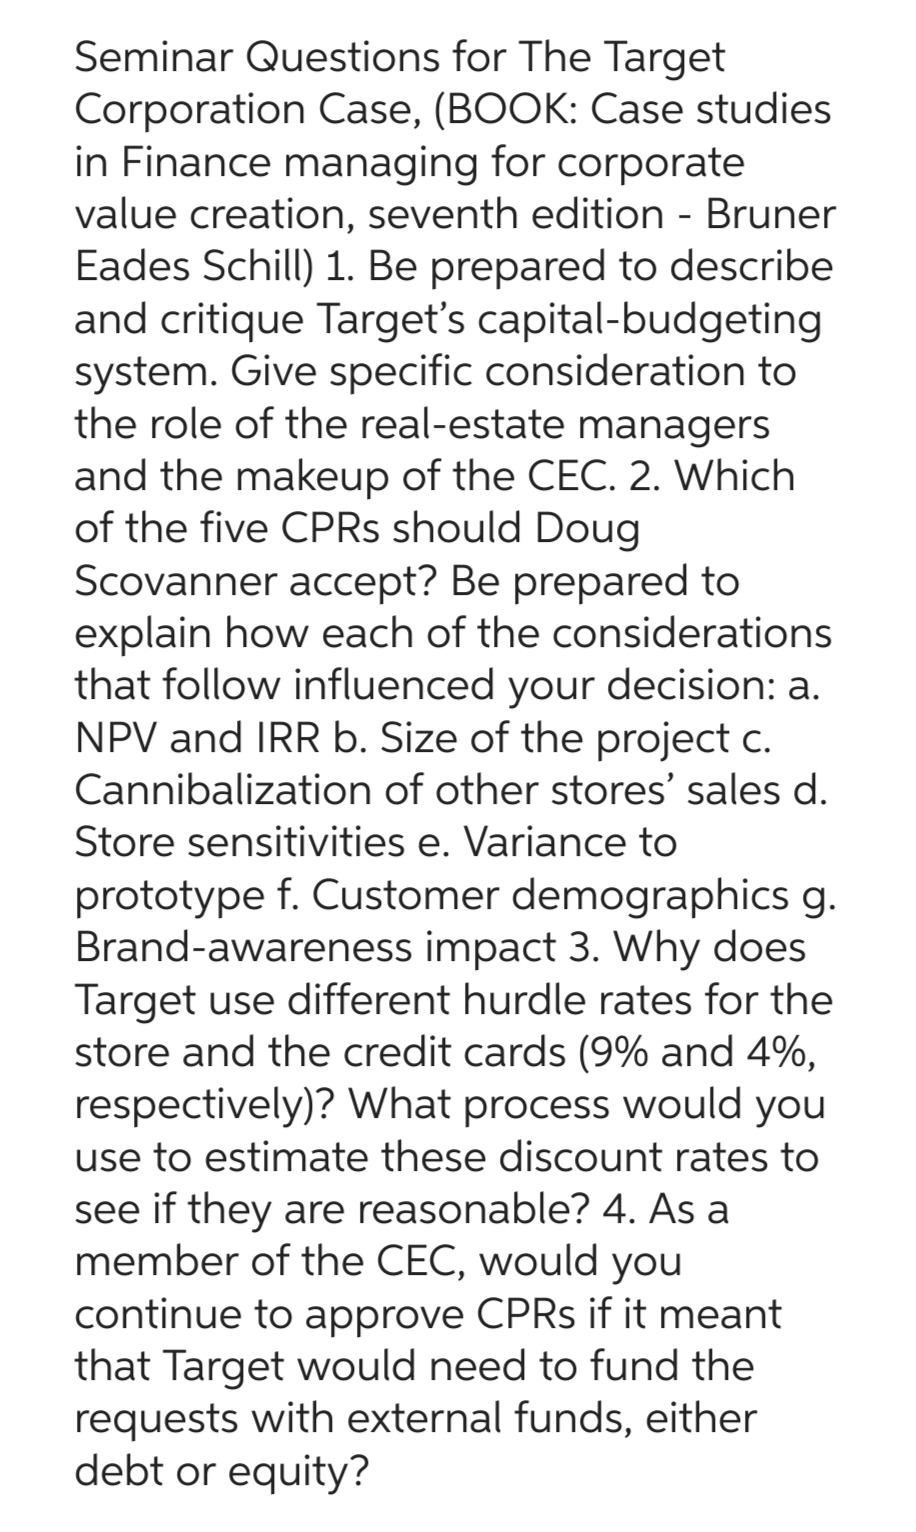 Seminar Questions for The Target
Corporation Case, (BOOK: Case studies
in Finance managing for corporate
value creation, seventh edition - Bruner
Eades Schill) 1. Be prepared to describe
and critique Target's capital-budgeting
system. Give specific consideration to
the role of the real-estate managers
and the makeup of the CEC. 2. Which
of the five CPRS should Doug
Scovanner accept? Be prepared to
explain how each of the considerations
that follow influenced your decision: a.
NPV and IRR b. Size of the project c.
Cannibalization of other stores' sales d.
Store sensitivities e. Variance to
prototype f. Customer demographics g.
Brand-awareness impact 3. Why does
Target use different hurdle rates for the
store and the credit cards (9% and 4%,
respectively)? What process would you
use to estimate these discount rates to
see if they are reasonable? 4. As a
member of the CEC, would you
continue to approve CPRs if it meant
that Target would need to fund the
requests with external funds, either
debt or equity?